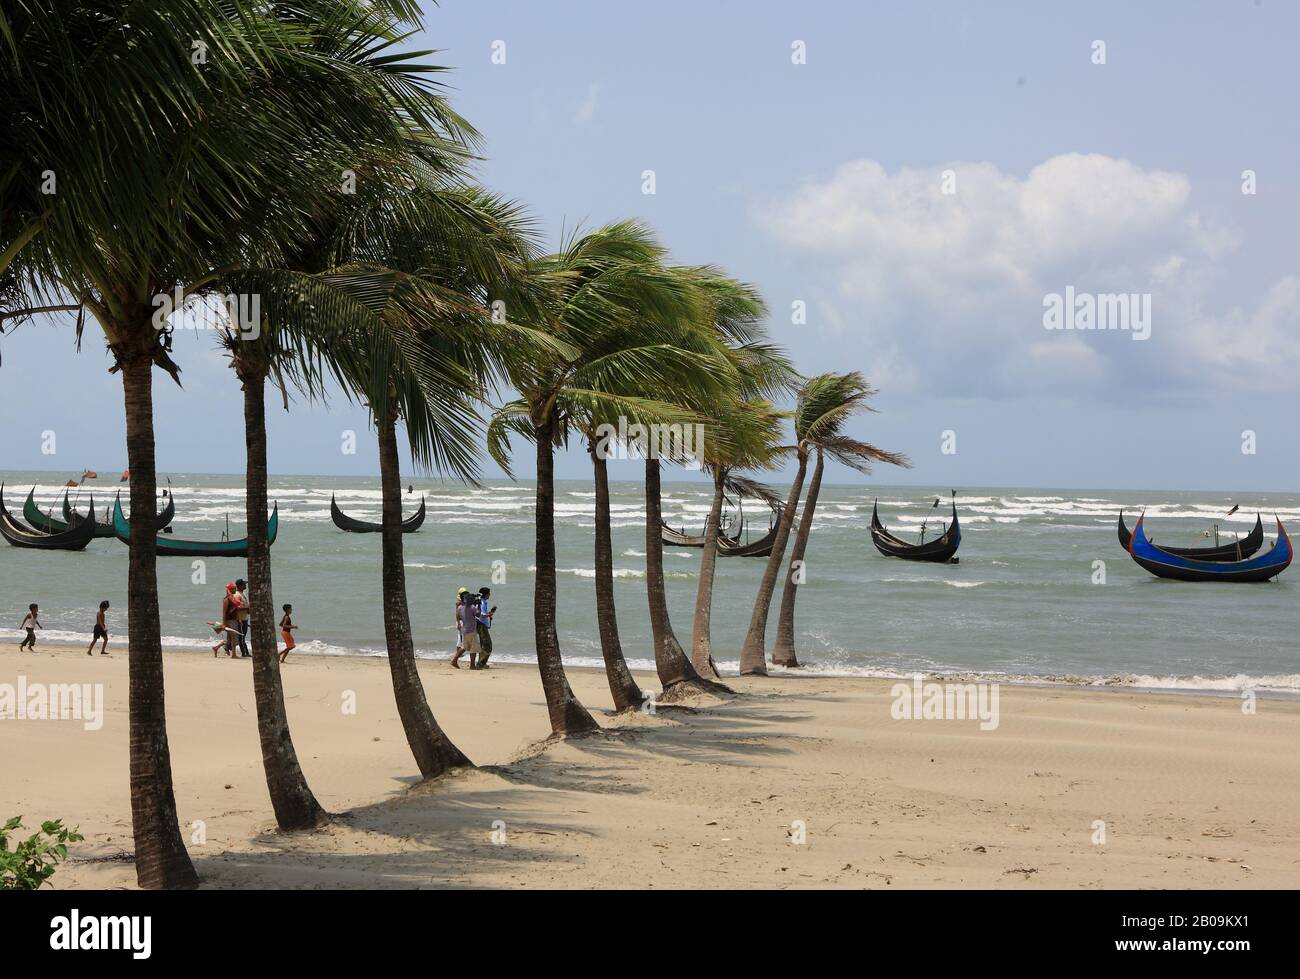 Coconut trees at  the world's longest beach in Cox's Bazar, Bangladesh. 2010. Stock Photo